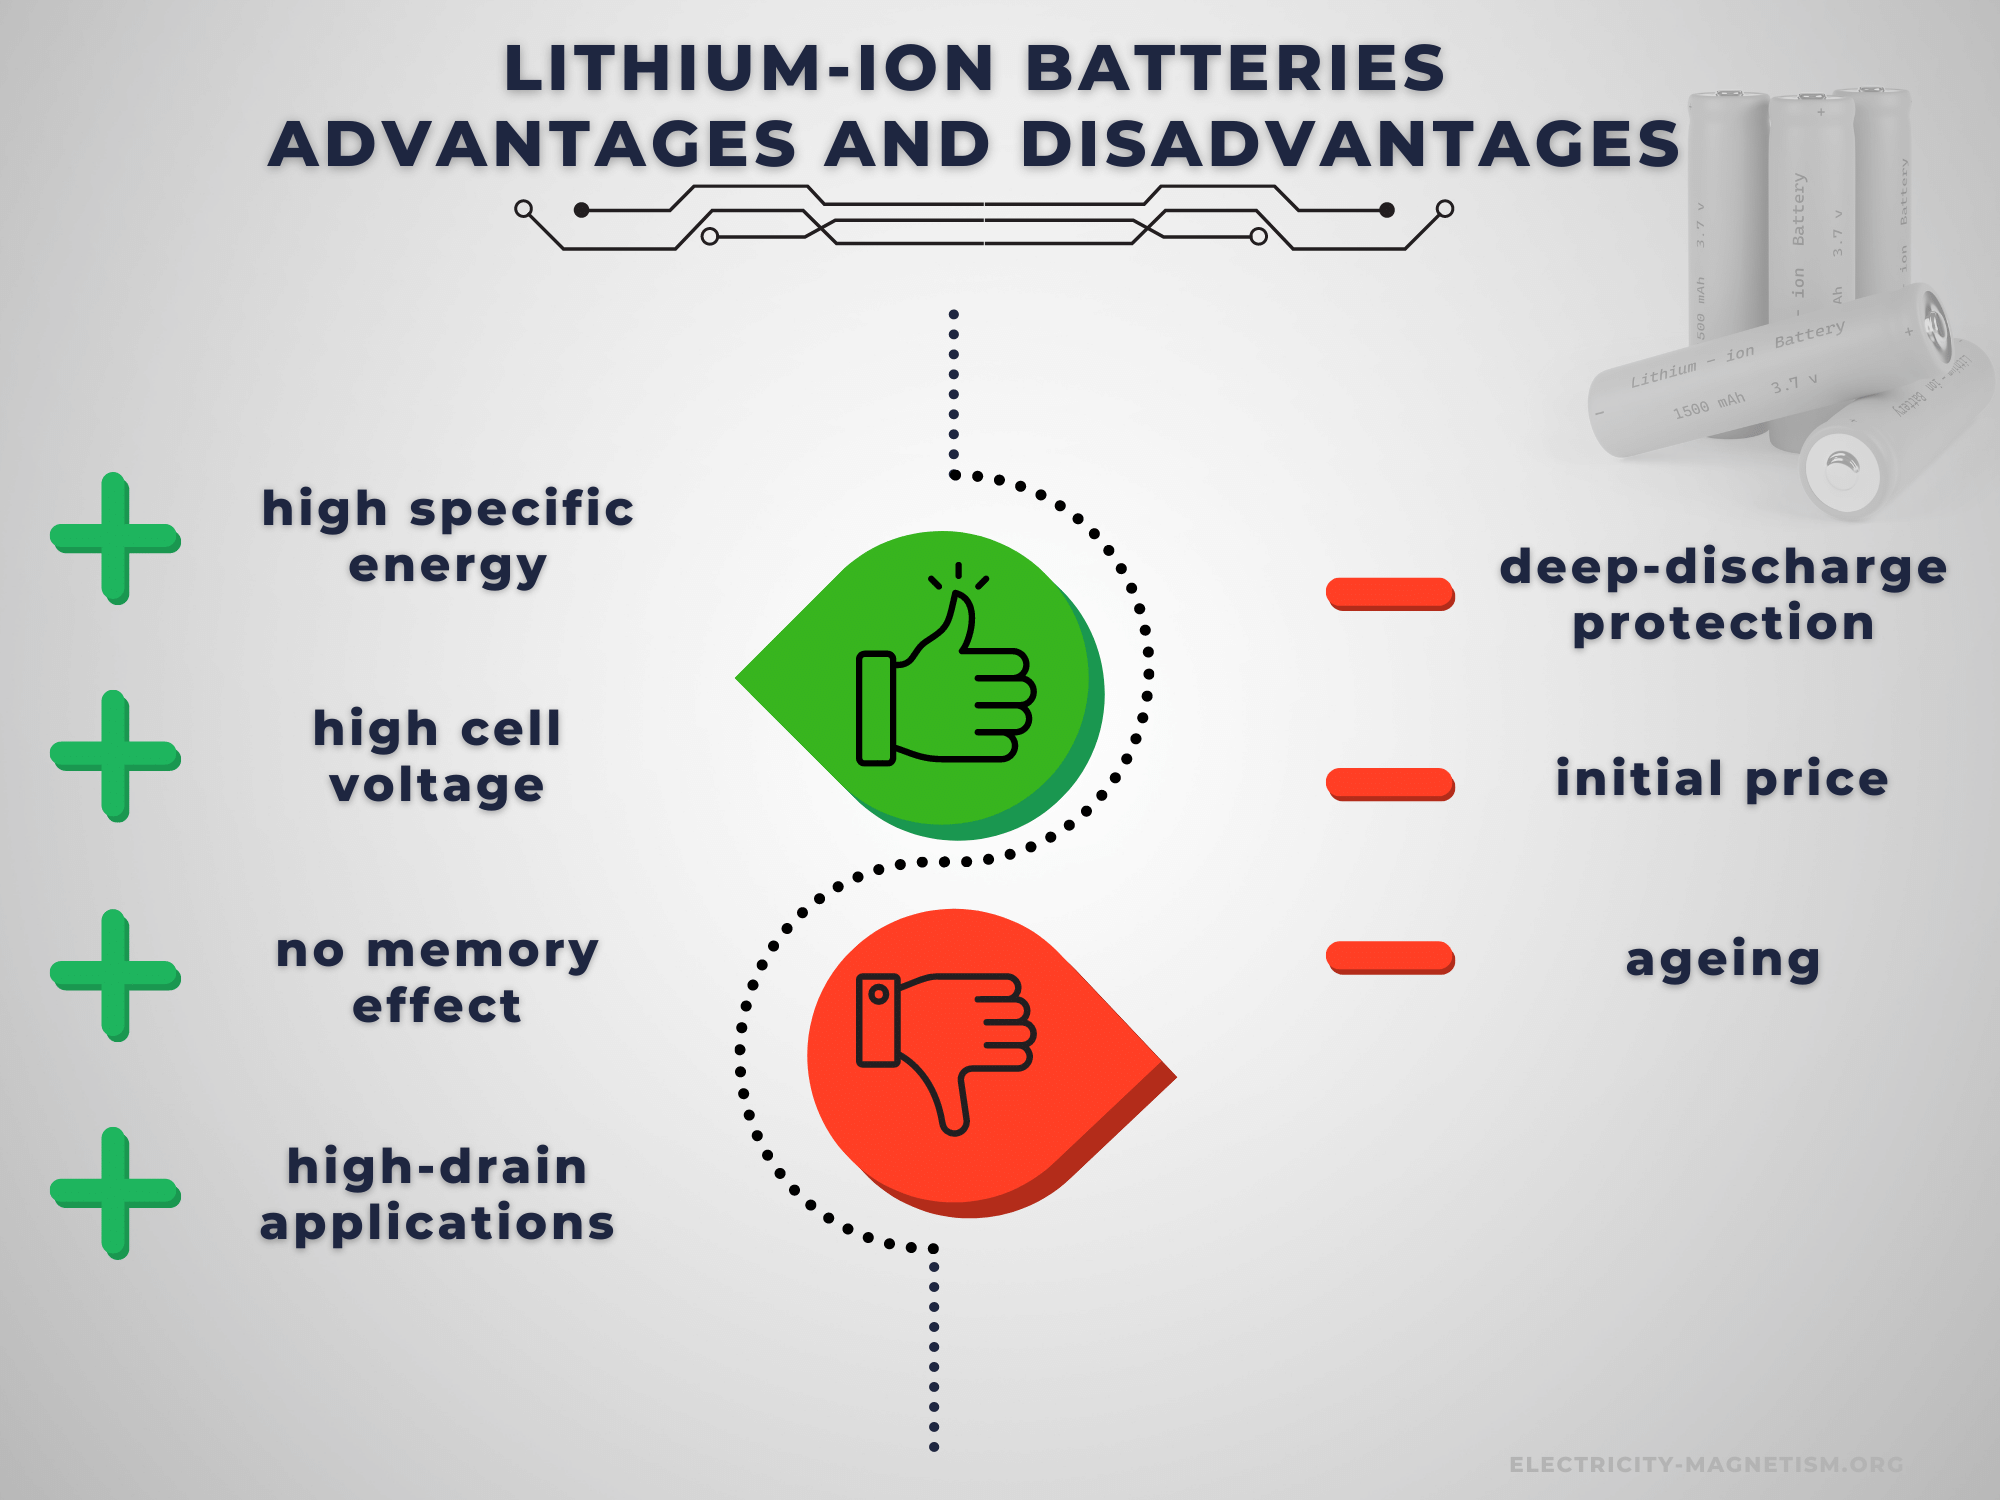 Advantages and Disadvantages of Lithium-ion Batteries